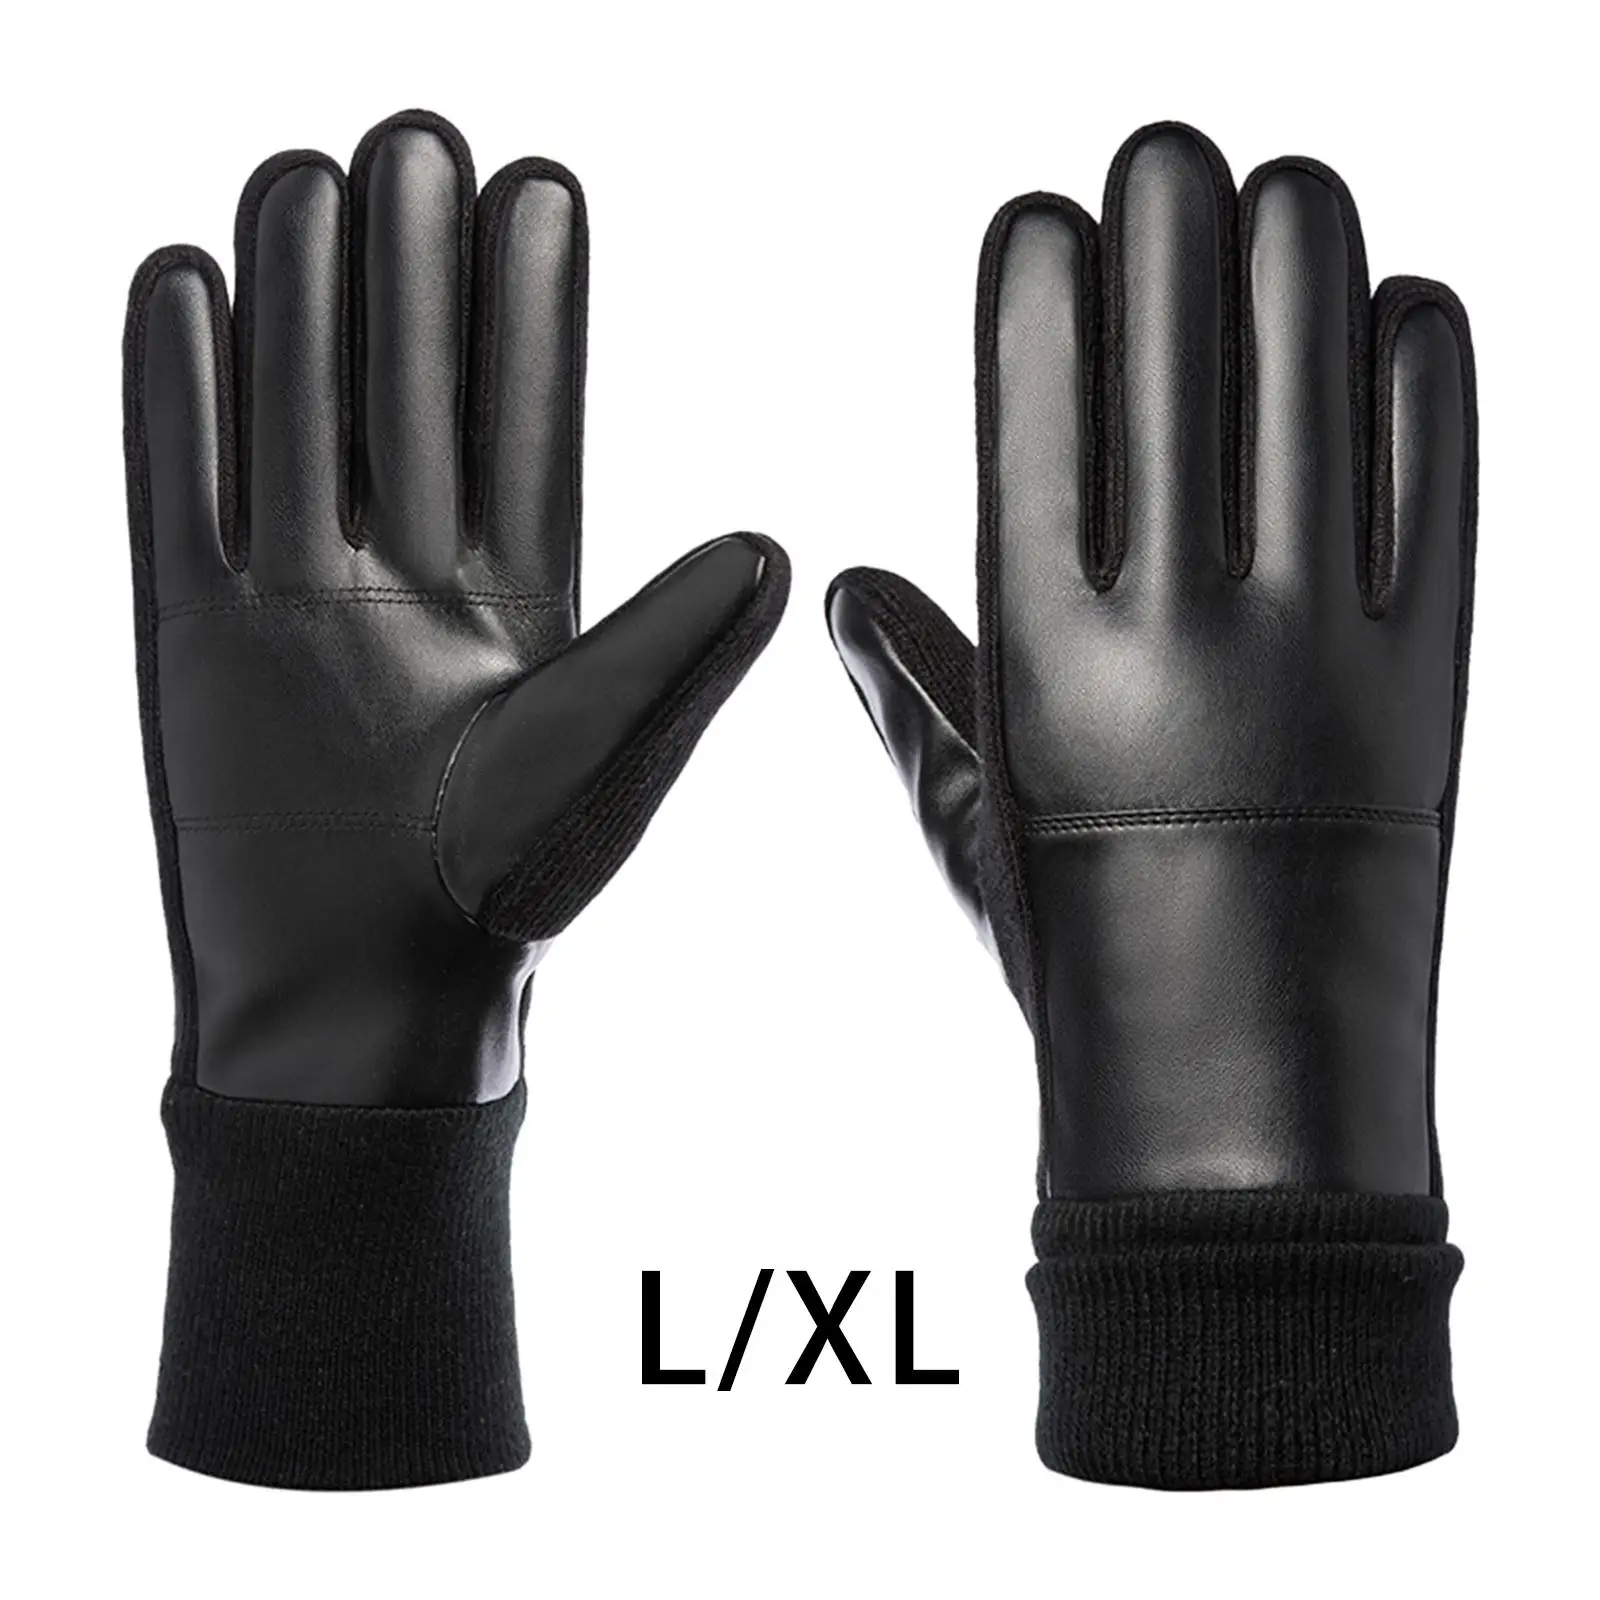 Thermal Men Gloves Anti-Slip Full Finger Waterproof Warm Windproof for Bicycle Snowboarding Ski Riding Driving